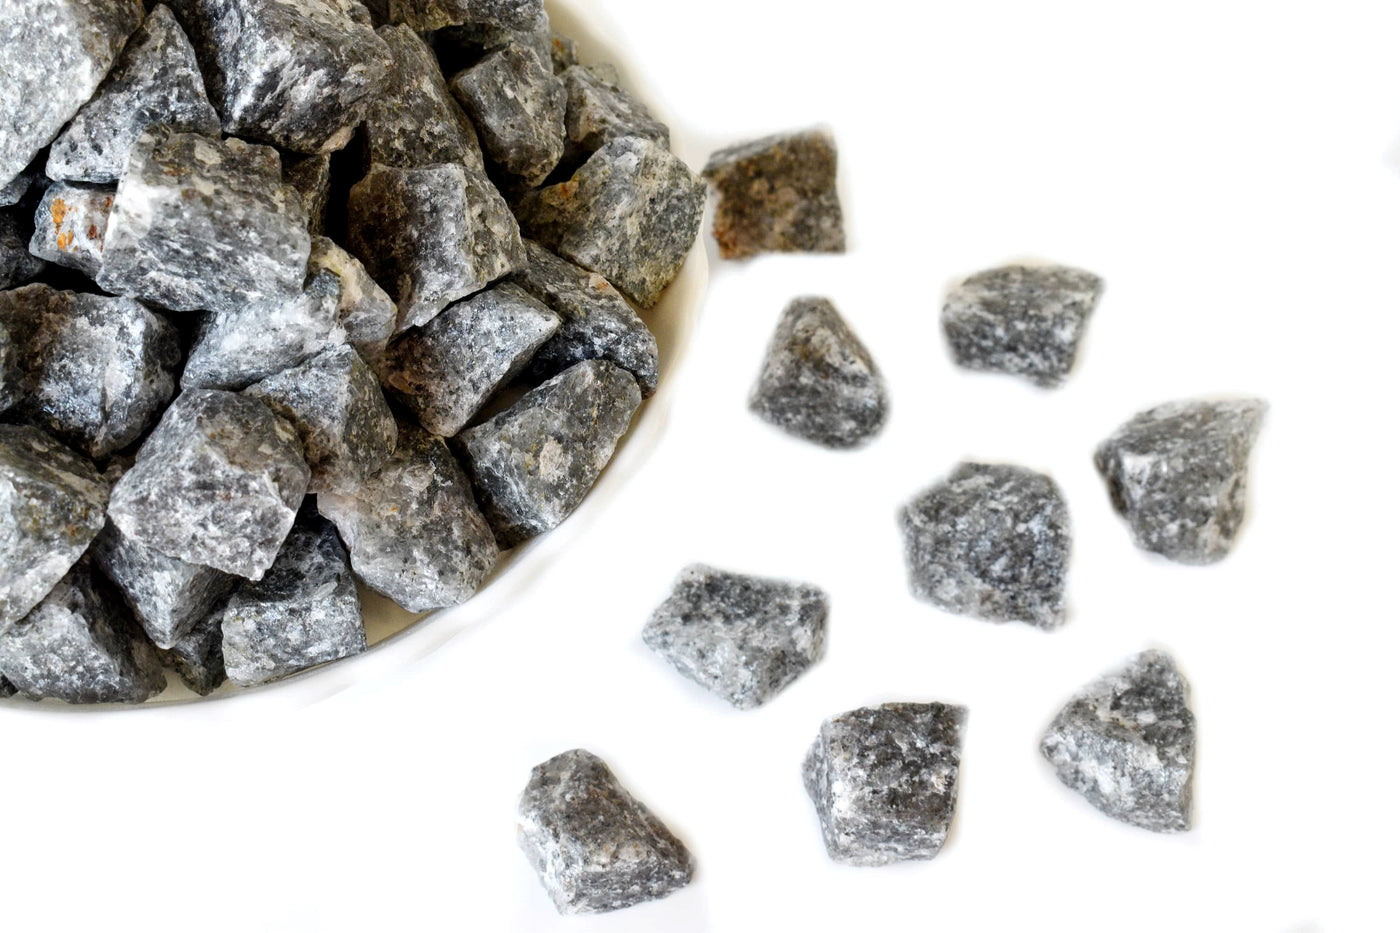 Black Rutile Rough Rocks (Promotes Strength and Growth)